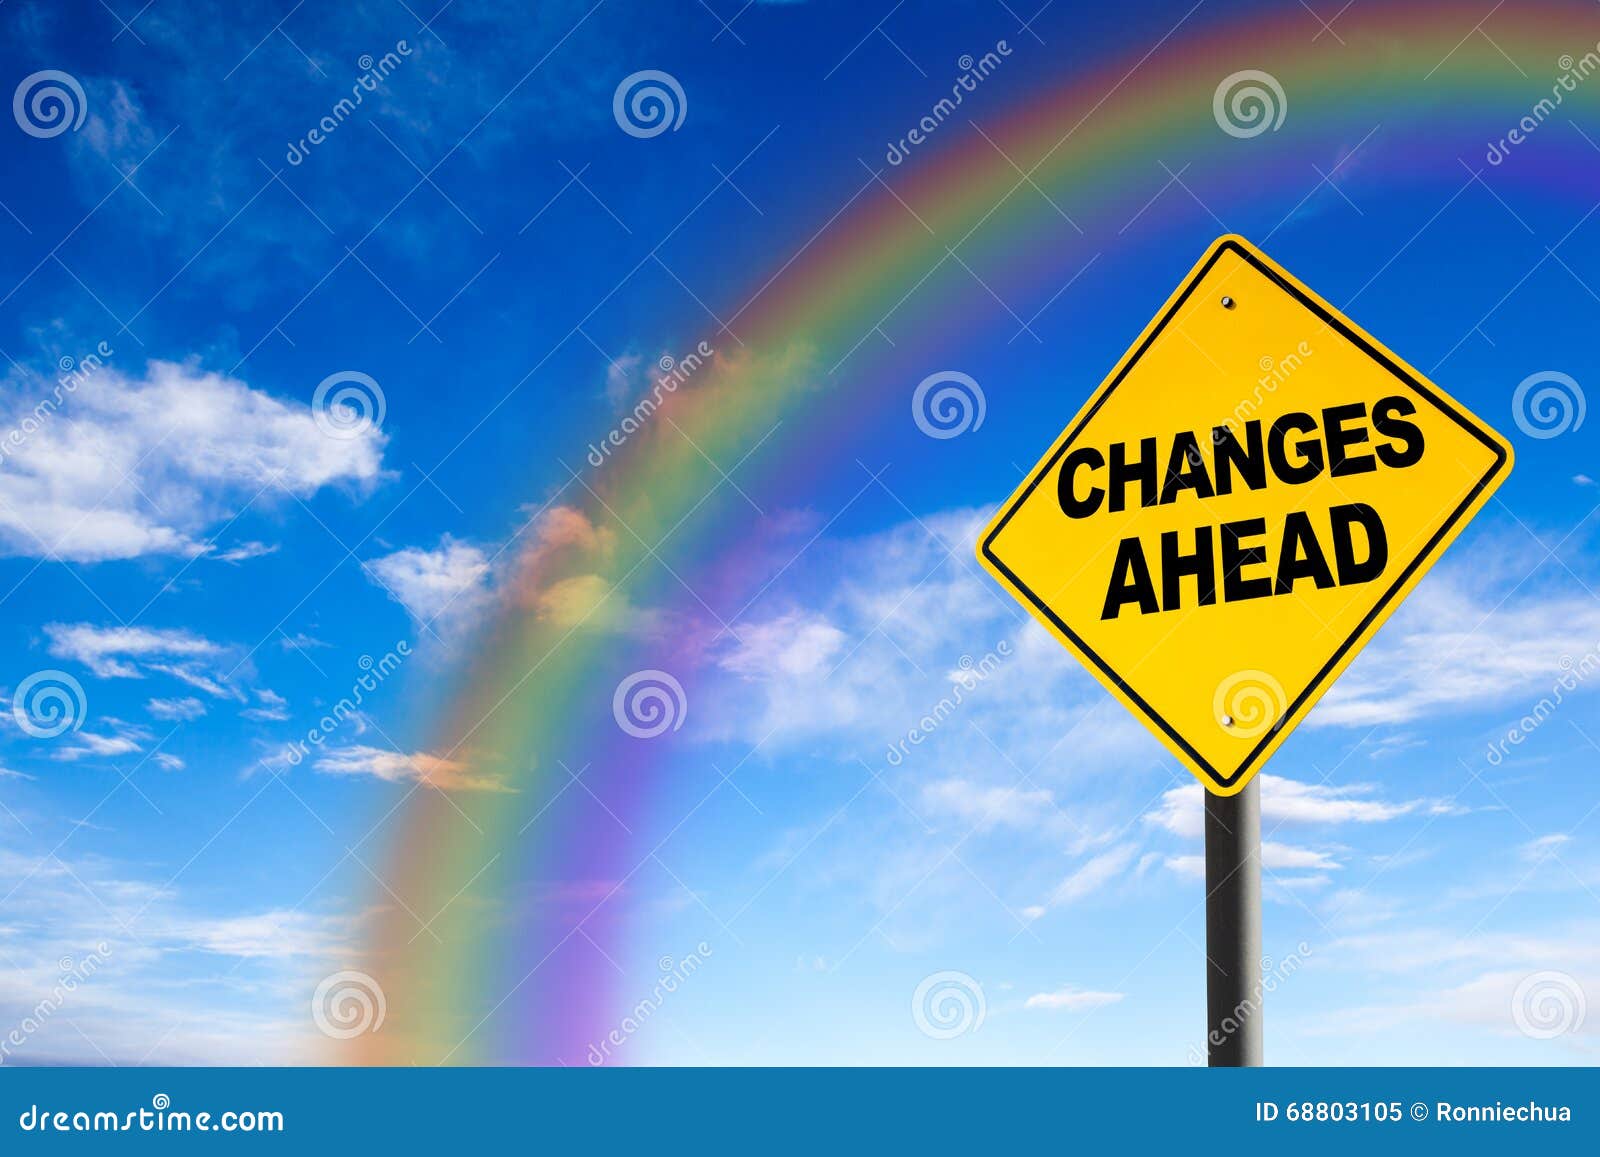 changes ahead sign with rainbow background